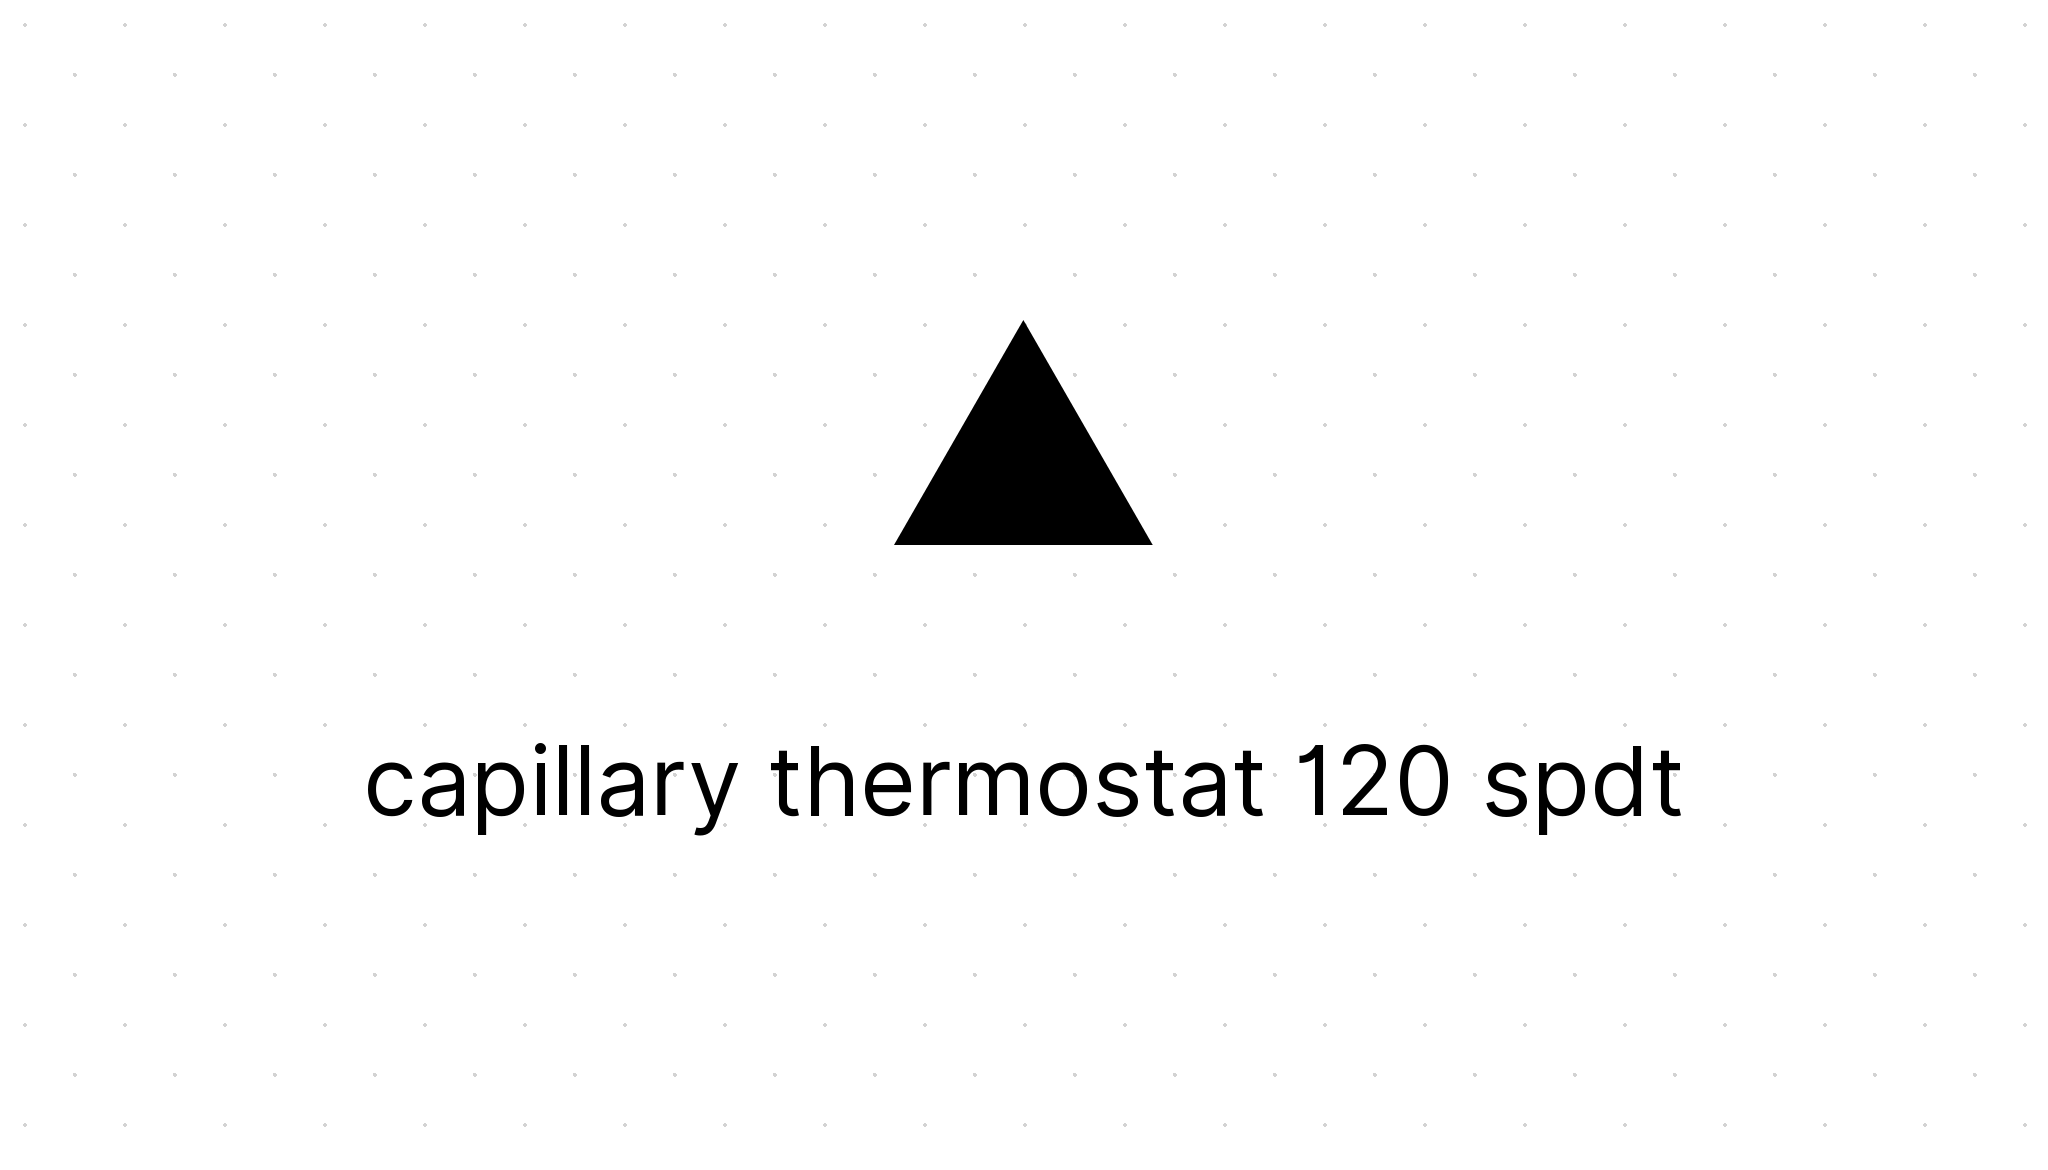 RS PRO Capillary Thermostat, +120°C Max, SPDT, Automatic Reset